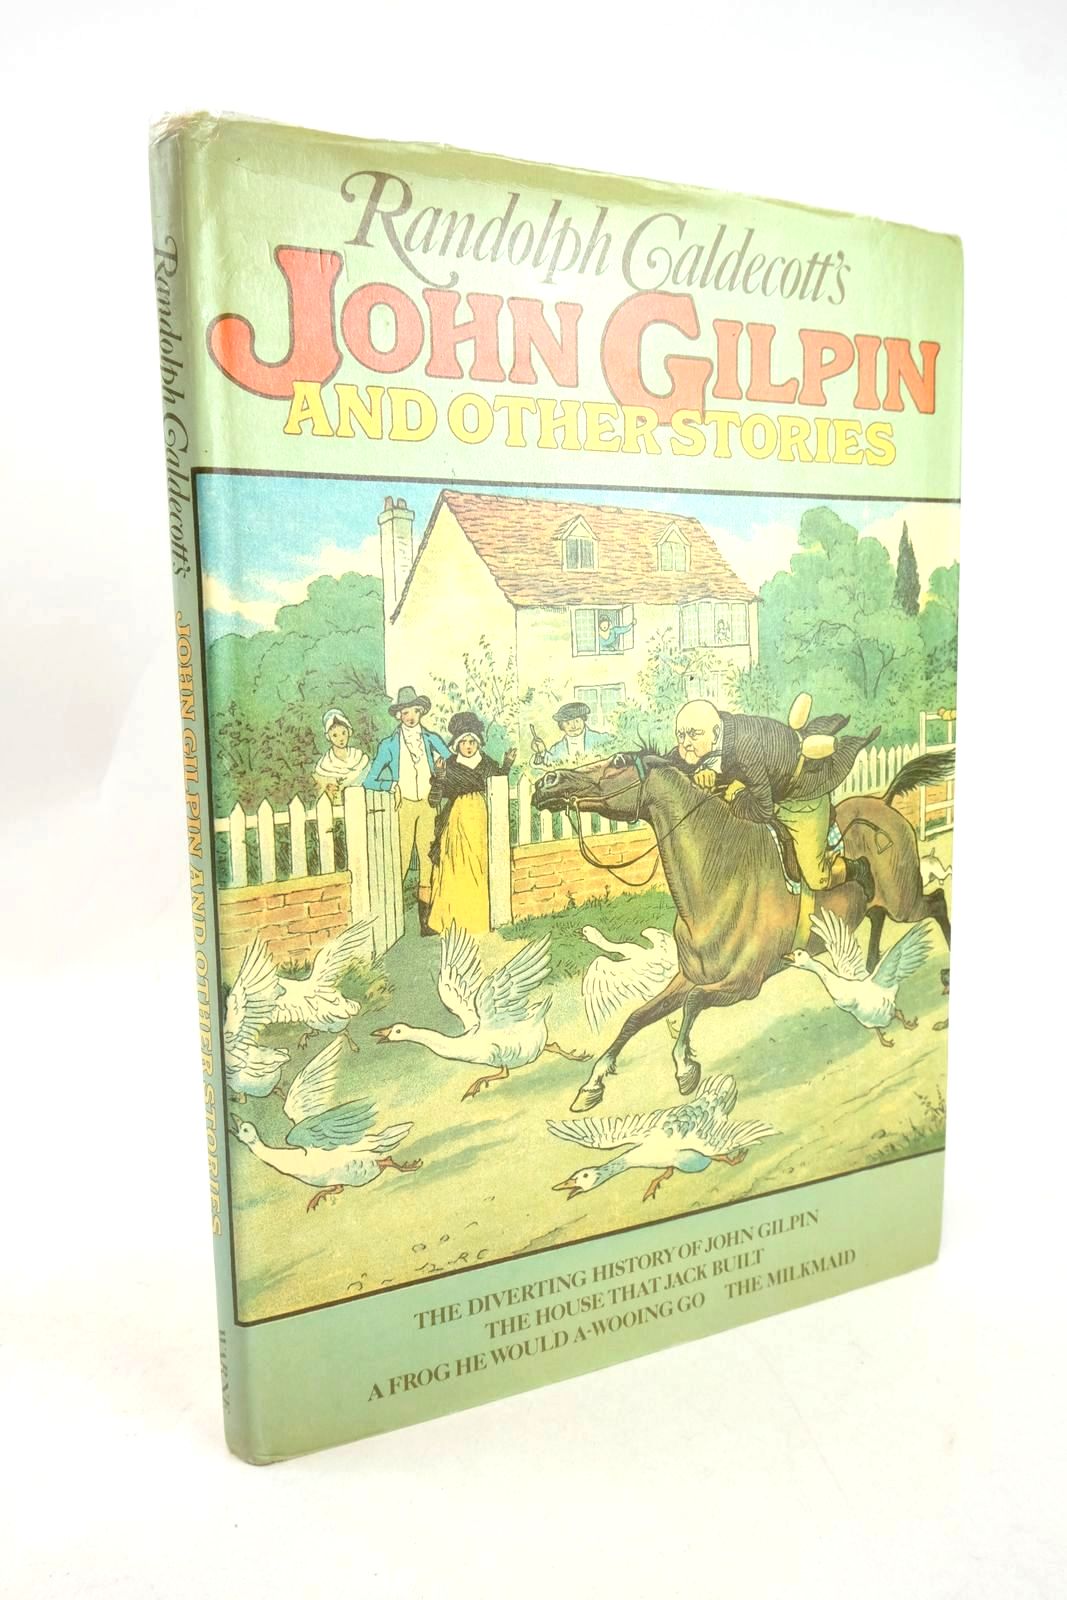 Photo of RANDOLPH CALDECOTT'S JOHN GILPIN AND OTHER STORIES illustrated by Caldecott, Randolph published by Frederick Warne (Publishers) Ltd. (STOCK CODE: 1327764)  for sale by Stella & Rose's Books